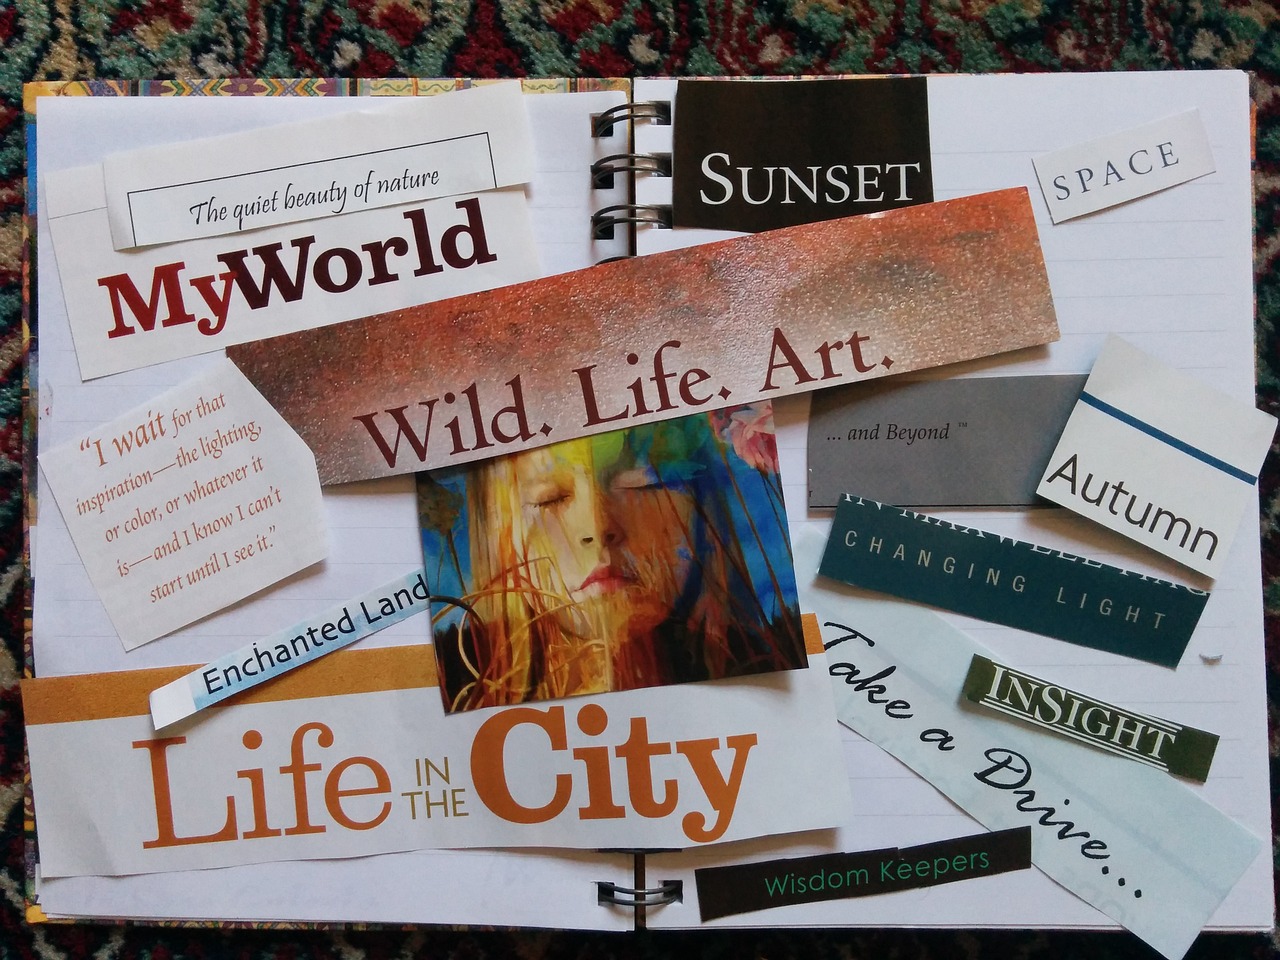 Vision Board Class with a Reflection Journal